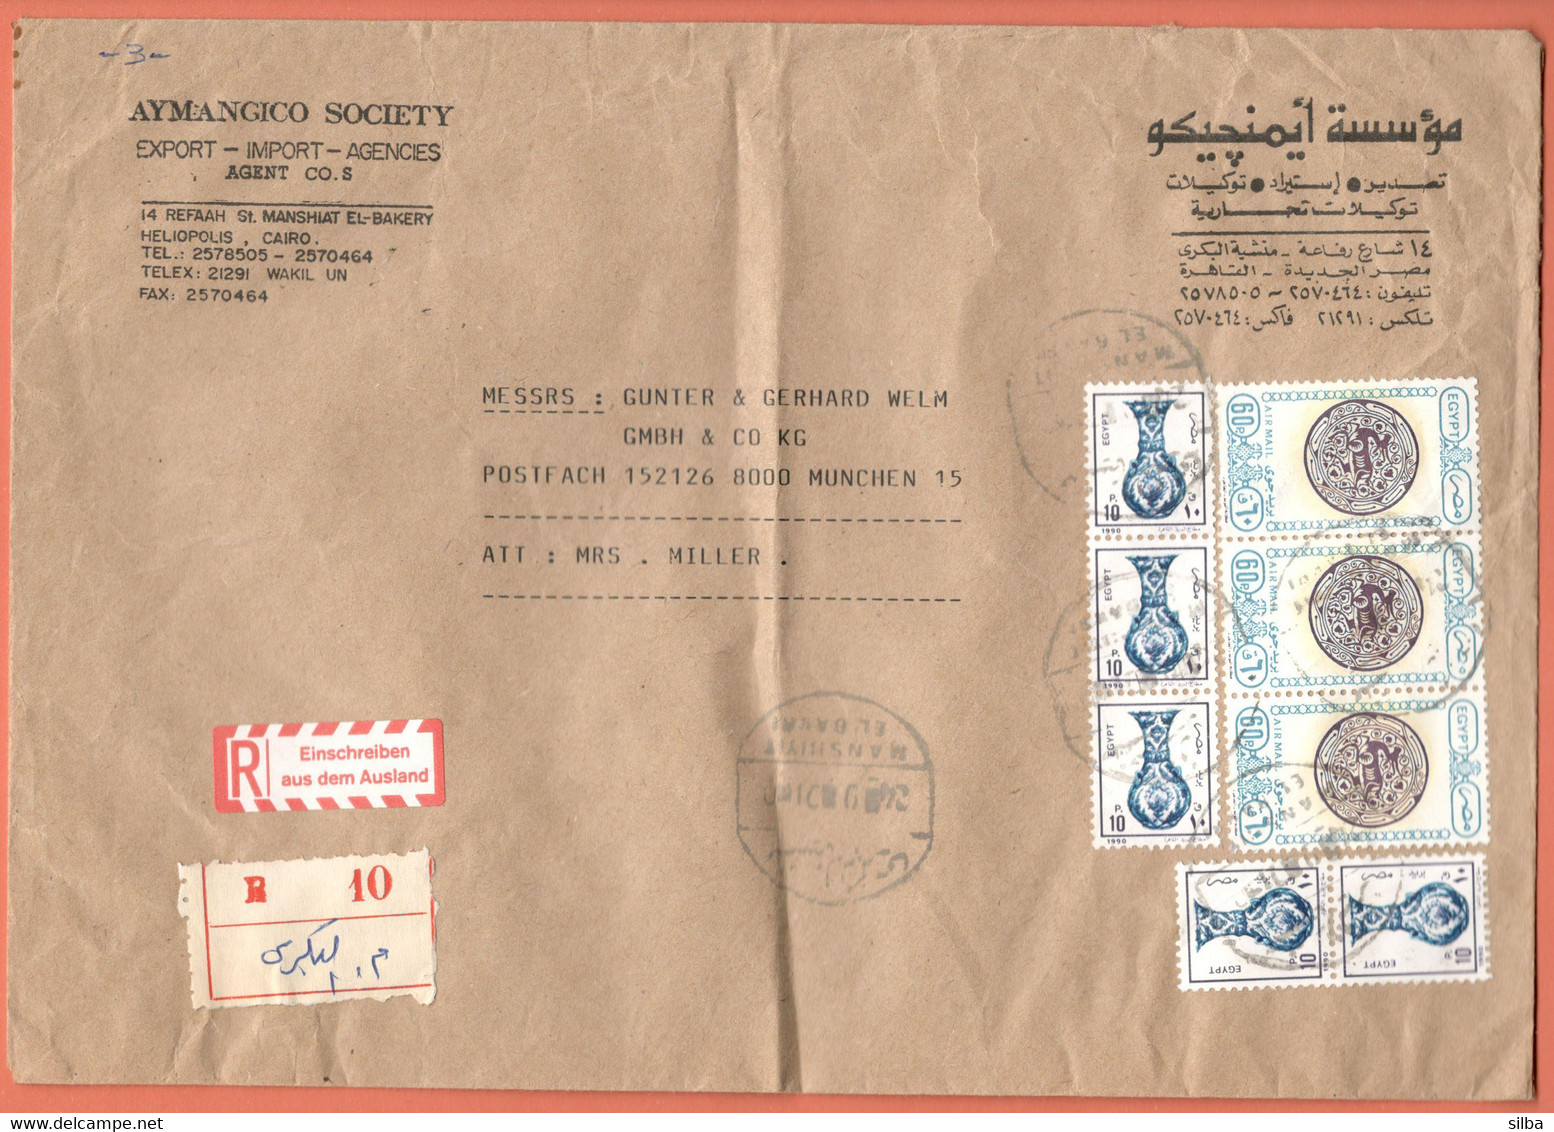 Egypt / Airmail - Art And Mosques, Dish With Gazelle Motif - 60 P, Vase 10 P, 1990 - Lettres & Documents